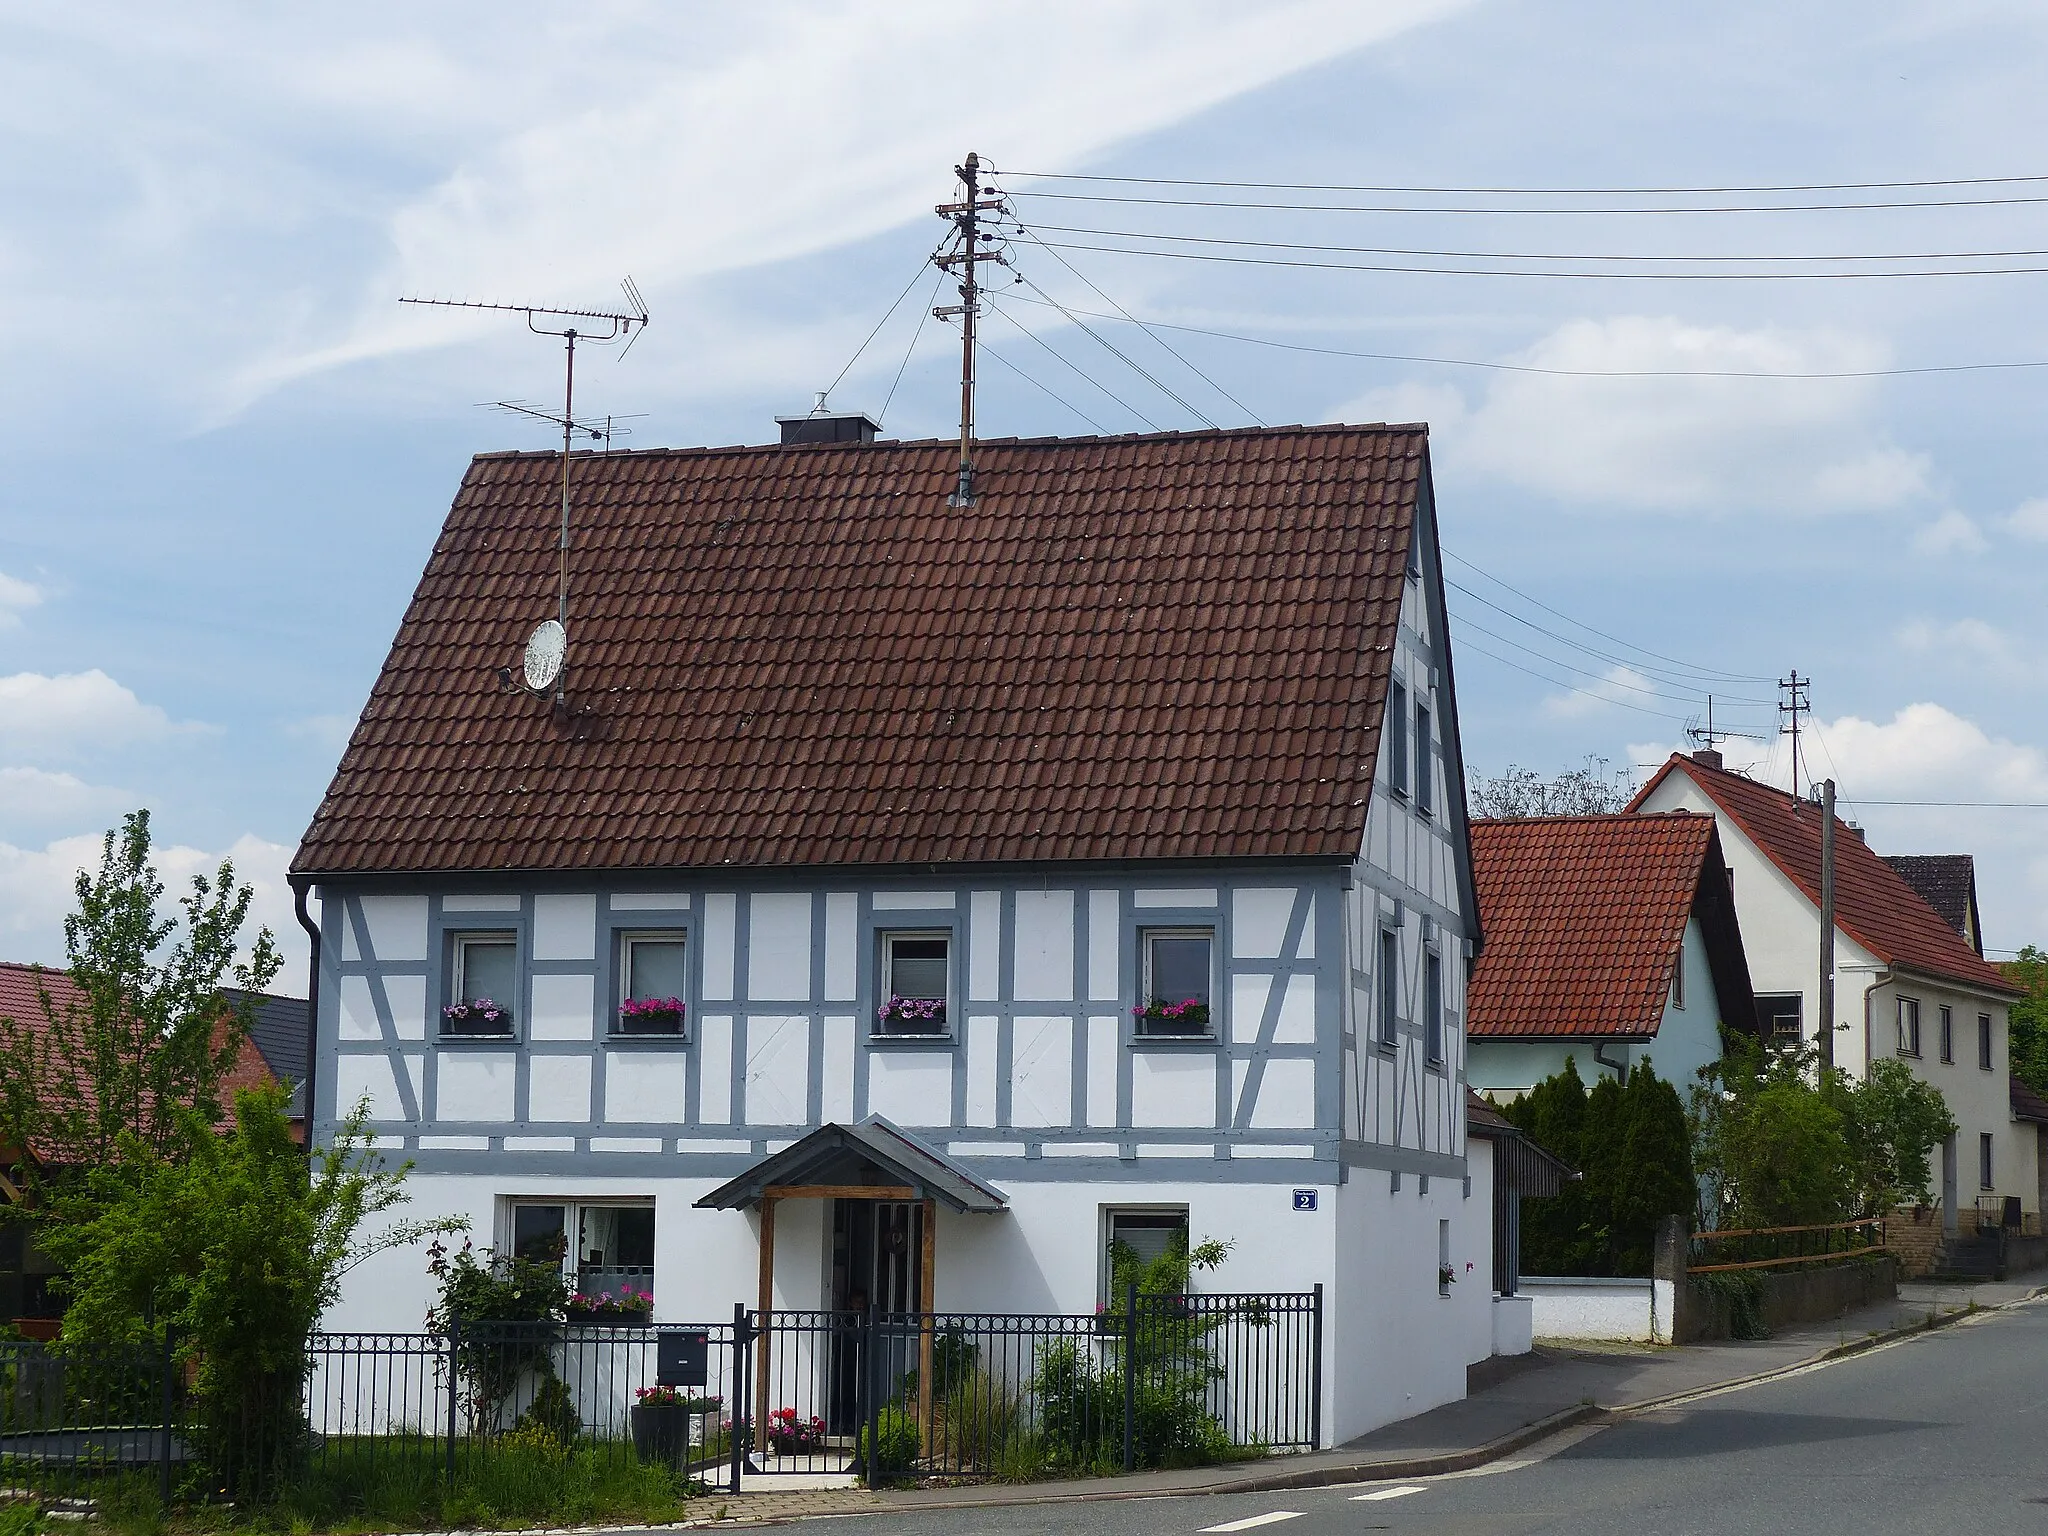 Photo showing: The village Dachstadt, a district of the municipality of Igensdorf